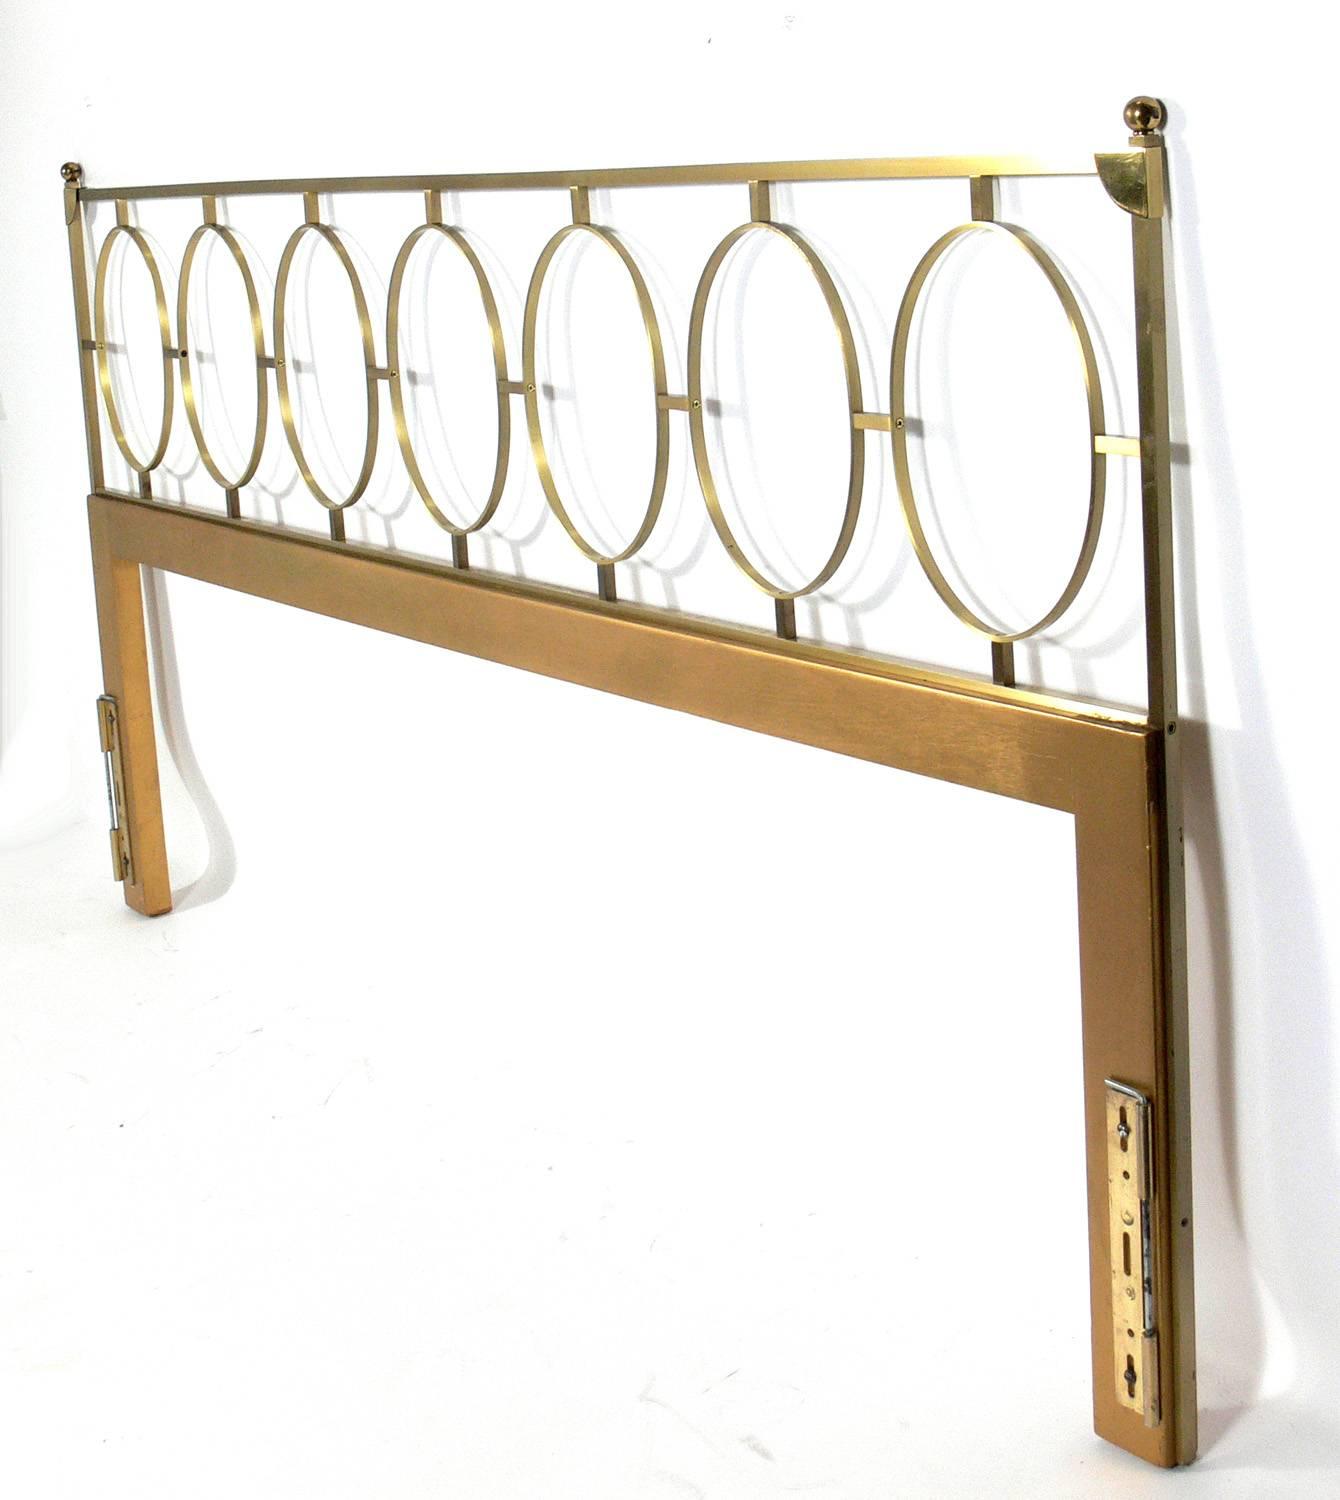 Glamorous brass headboard for a king-size bed, American, circa 1960s. Retains it's warm original patina. Works with most standard bolt on bed frames (not included).